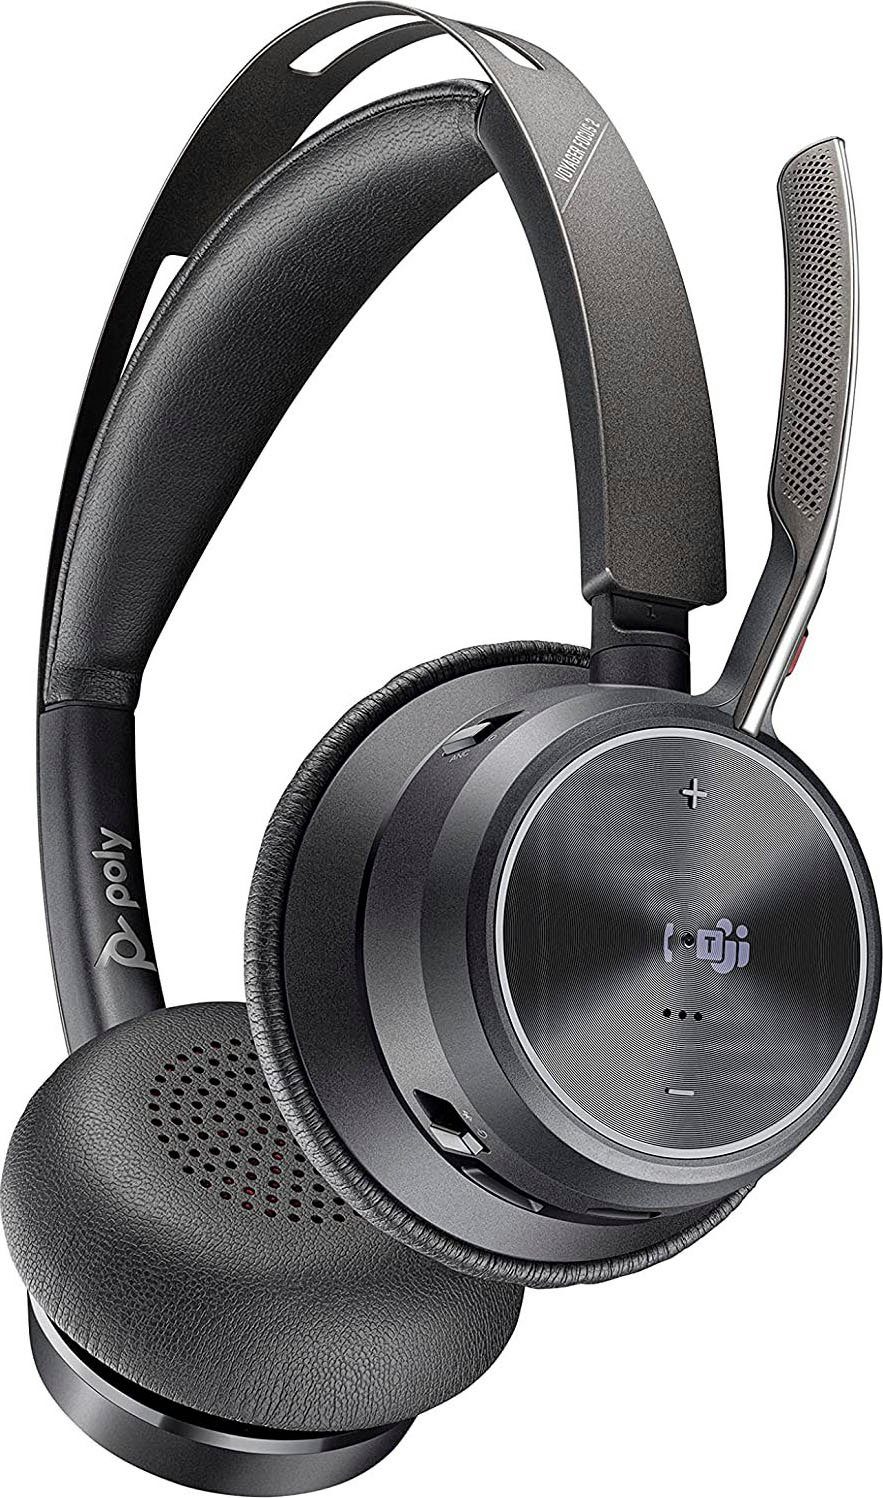 Voyager Poly (Noise-Cancelling, Wireless-Headset Focus Bluetooth) UC